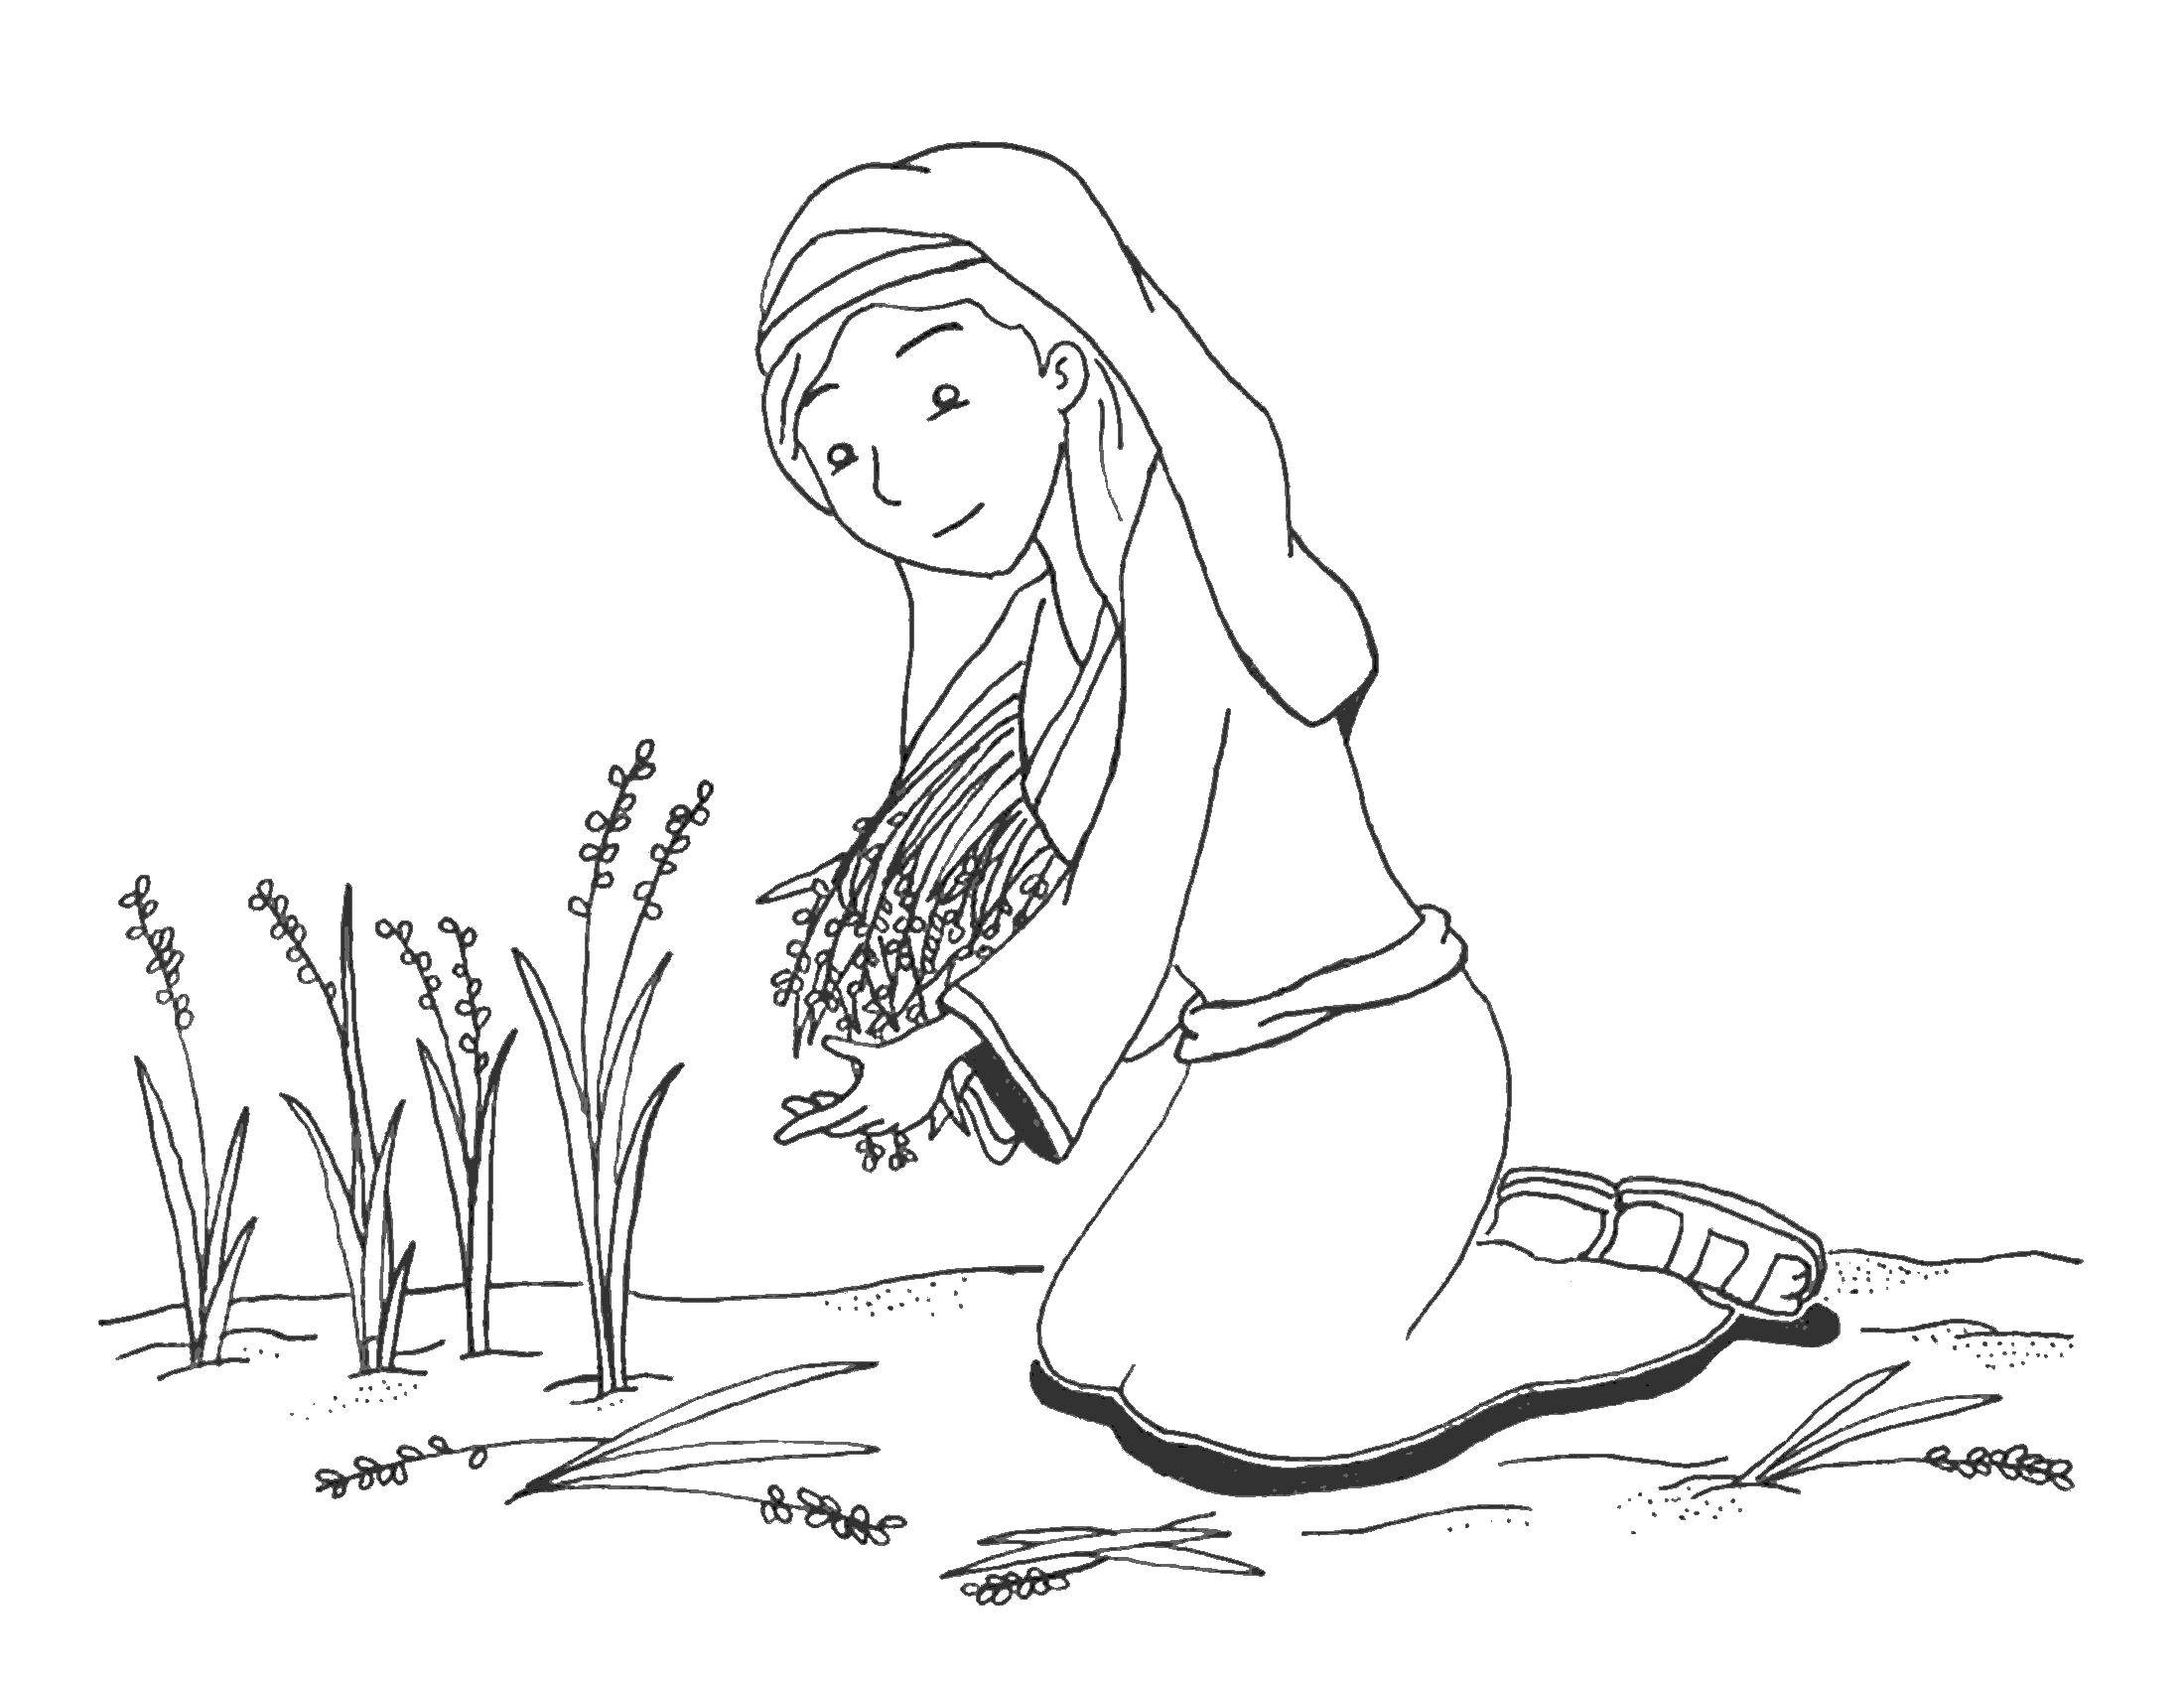 Coloring Girl harvests. Category the Bible. Tags:  girl, people.